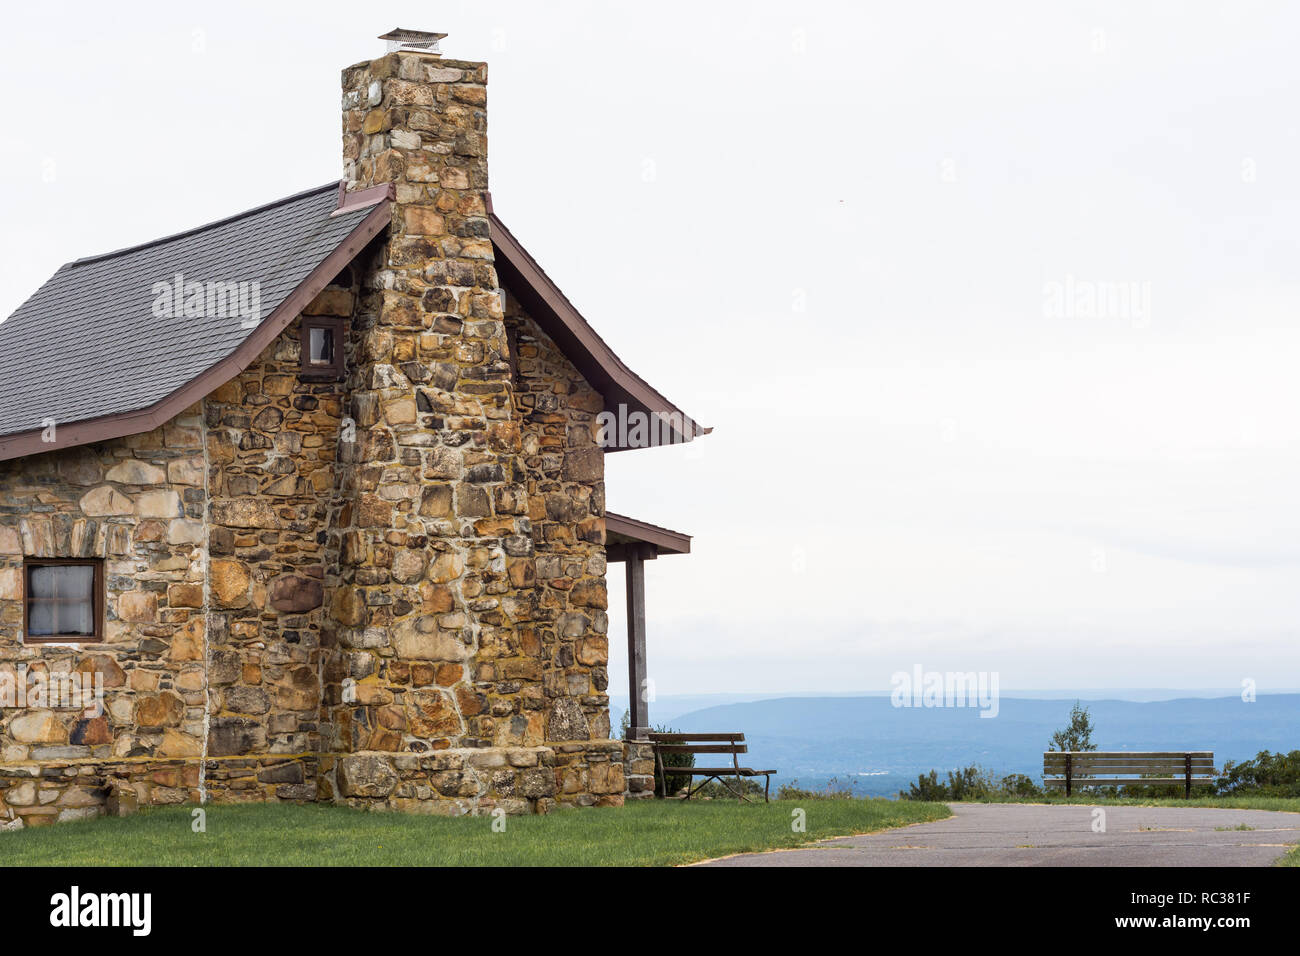 Stone building with chimney in public park with benches and a view. Stock Photo